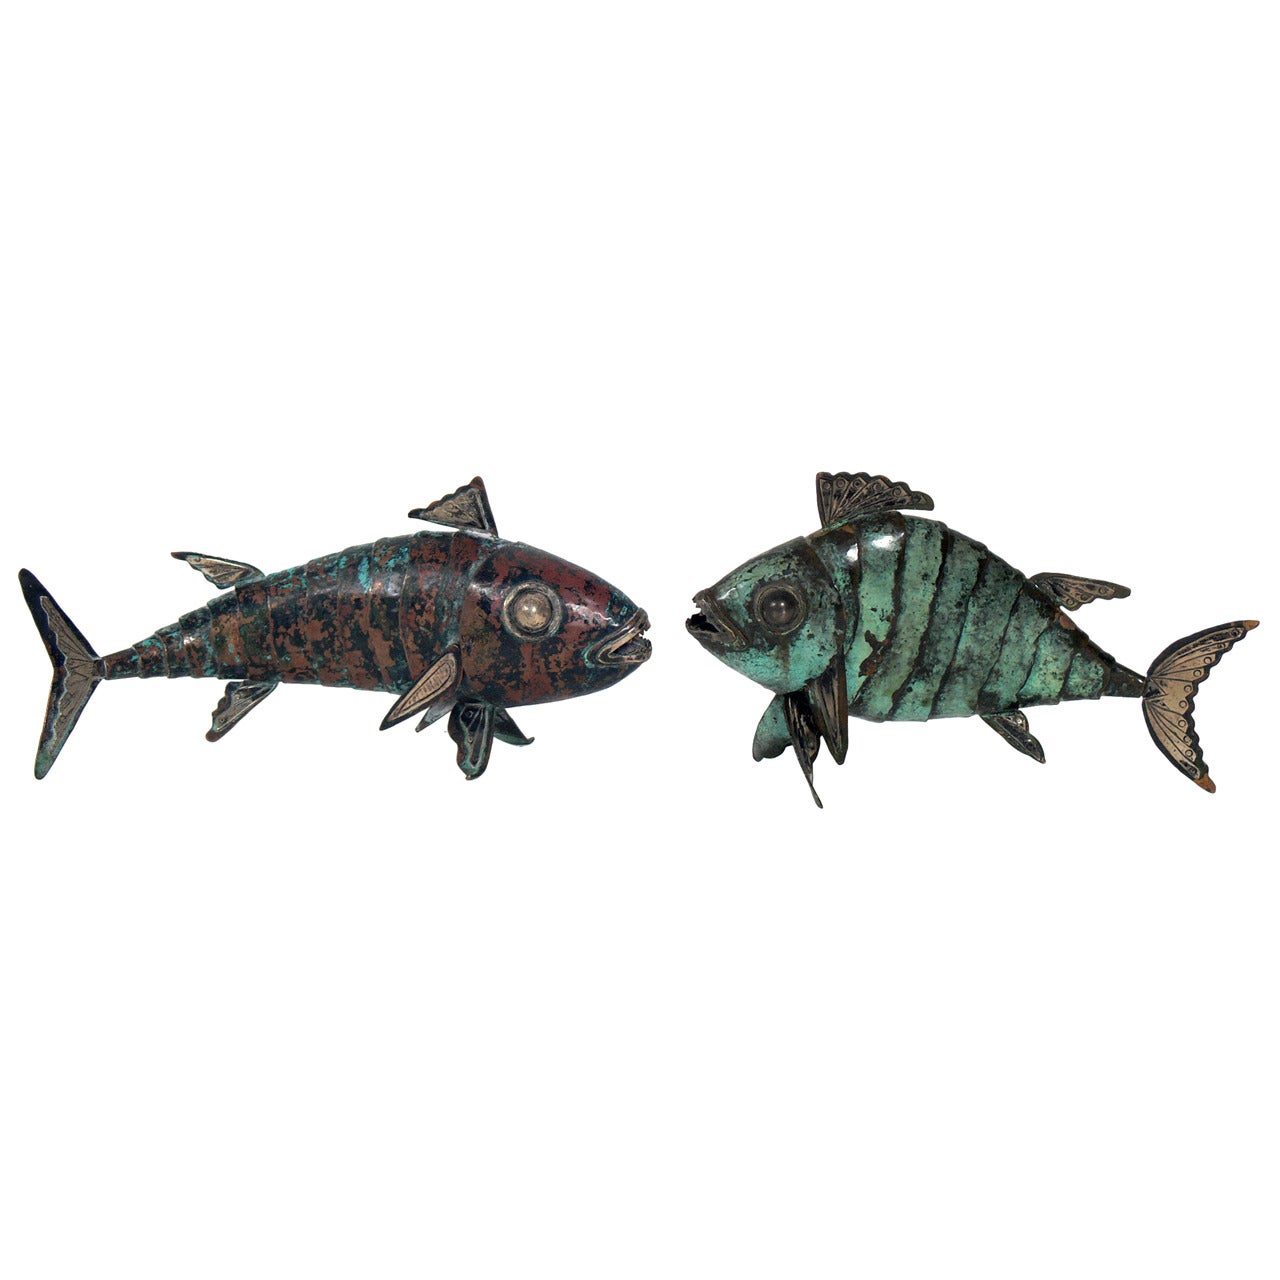 Pair of Articulated Fish Sculptures by Graziella Laffi